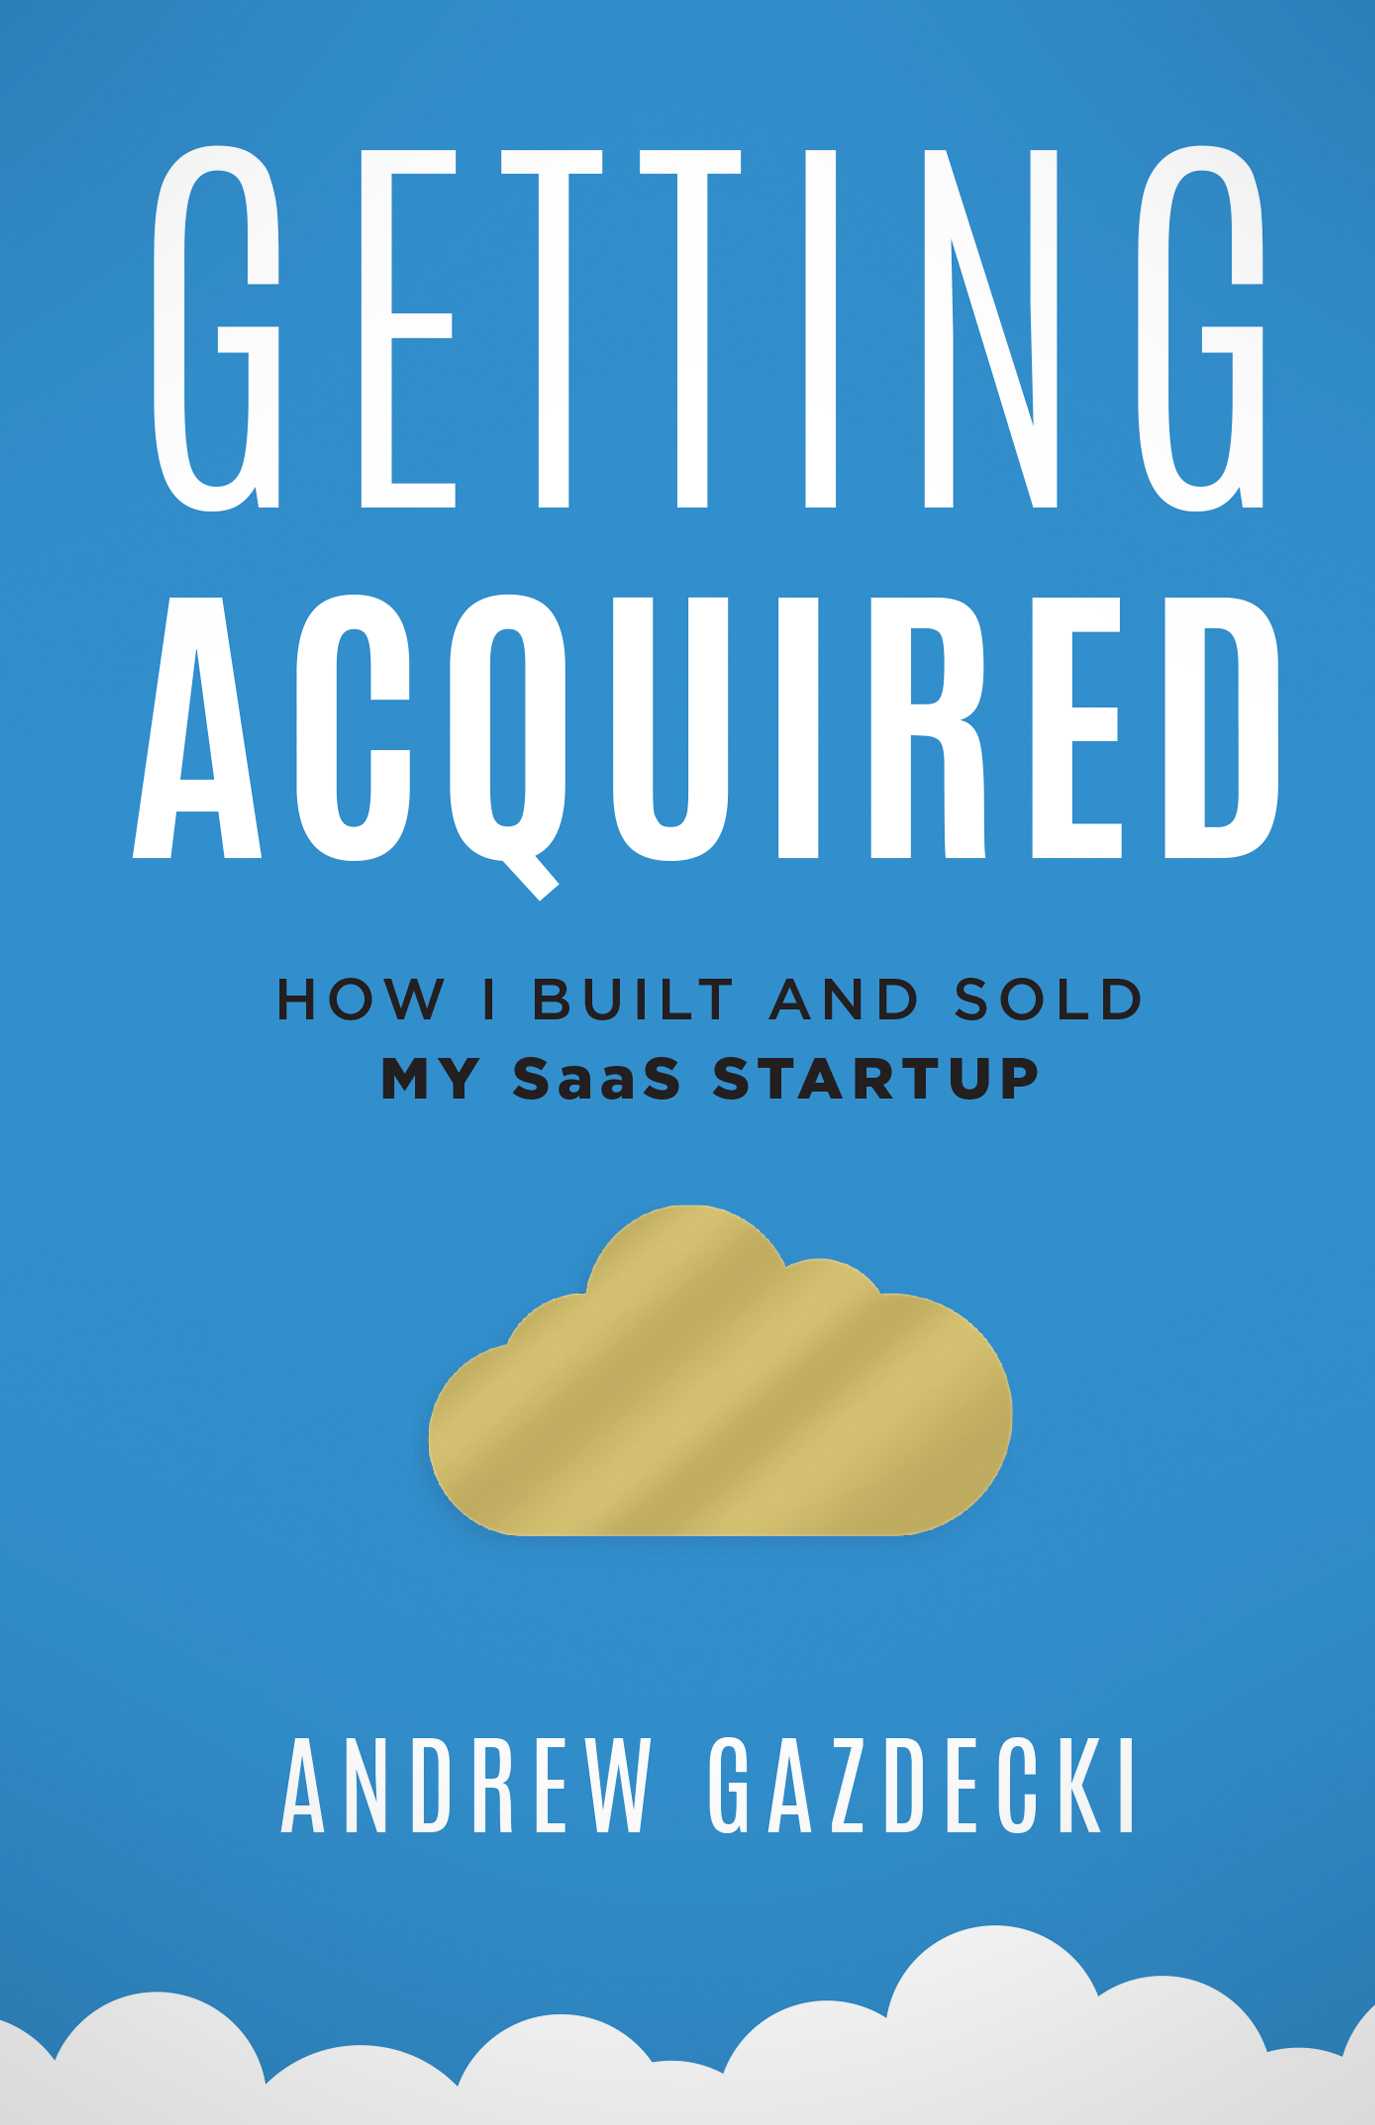 Getting Acquired: How I Built and Sold My SaaS Startup